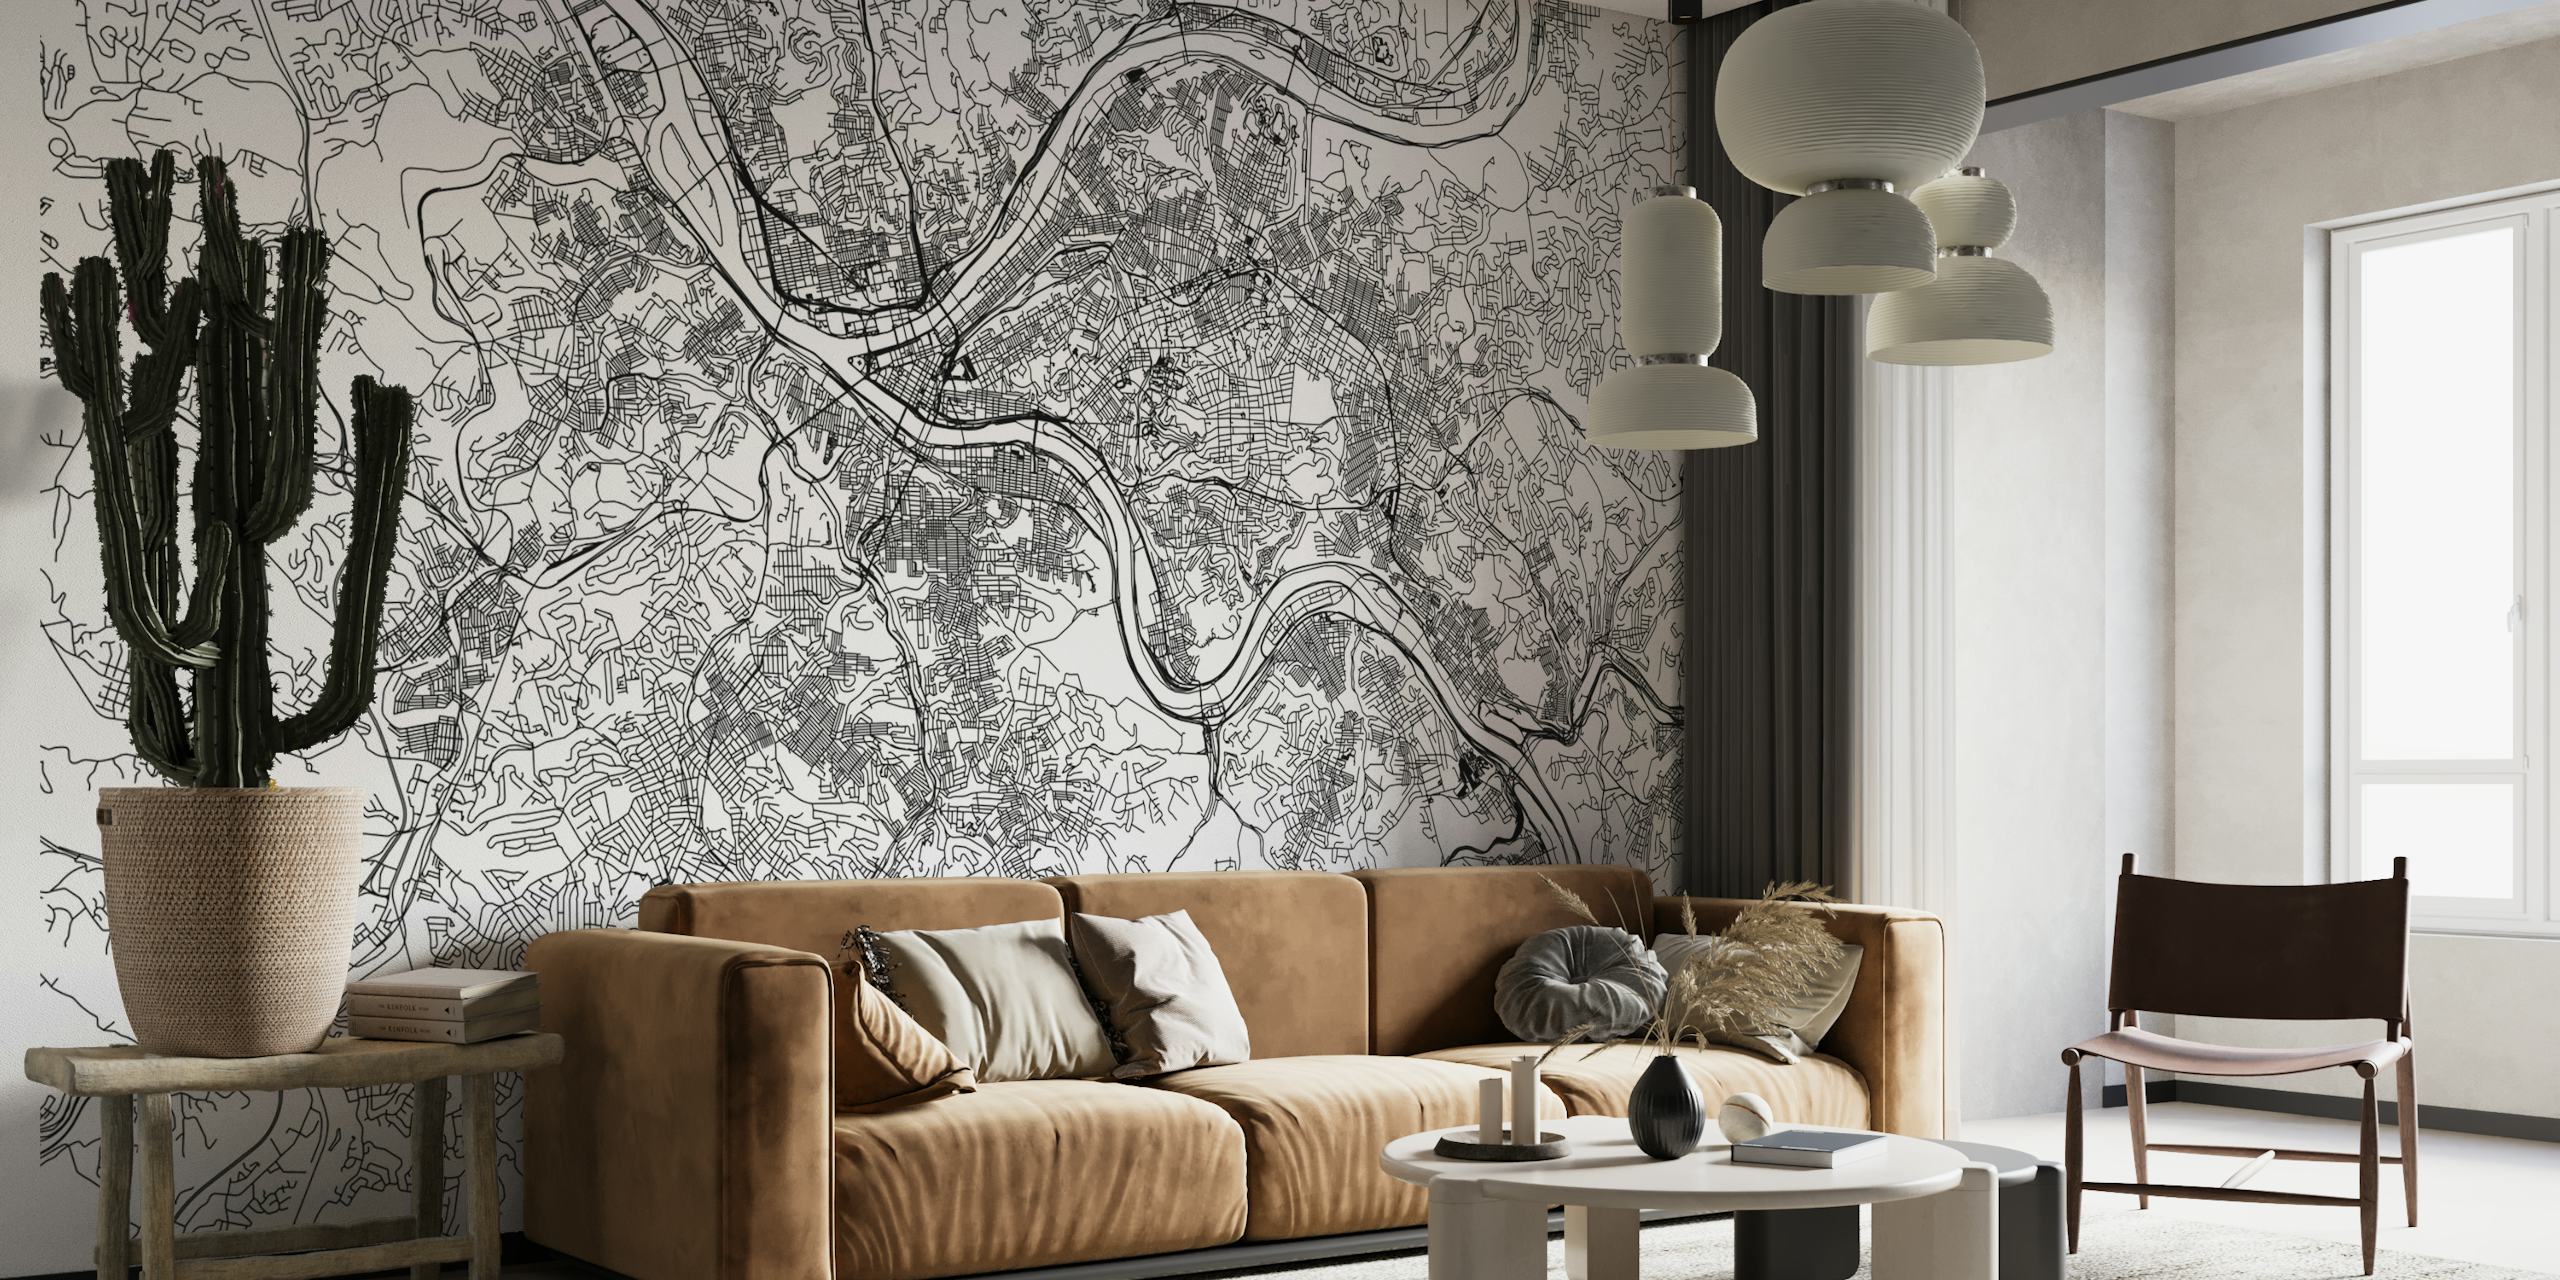 Intricately designed Pittsburgh Map Wallpaper mural